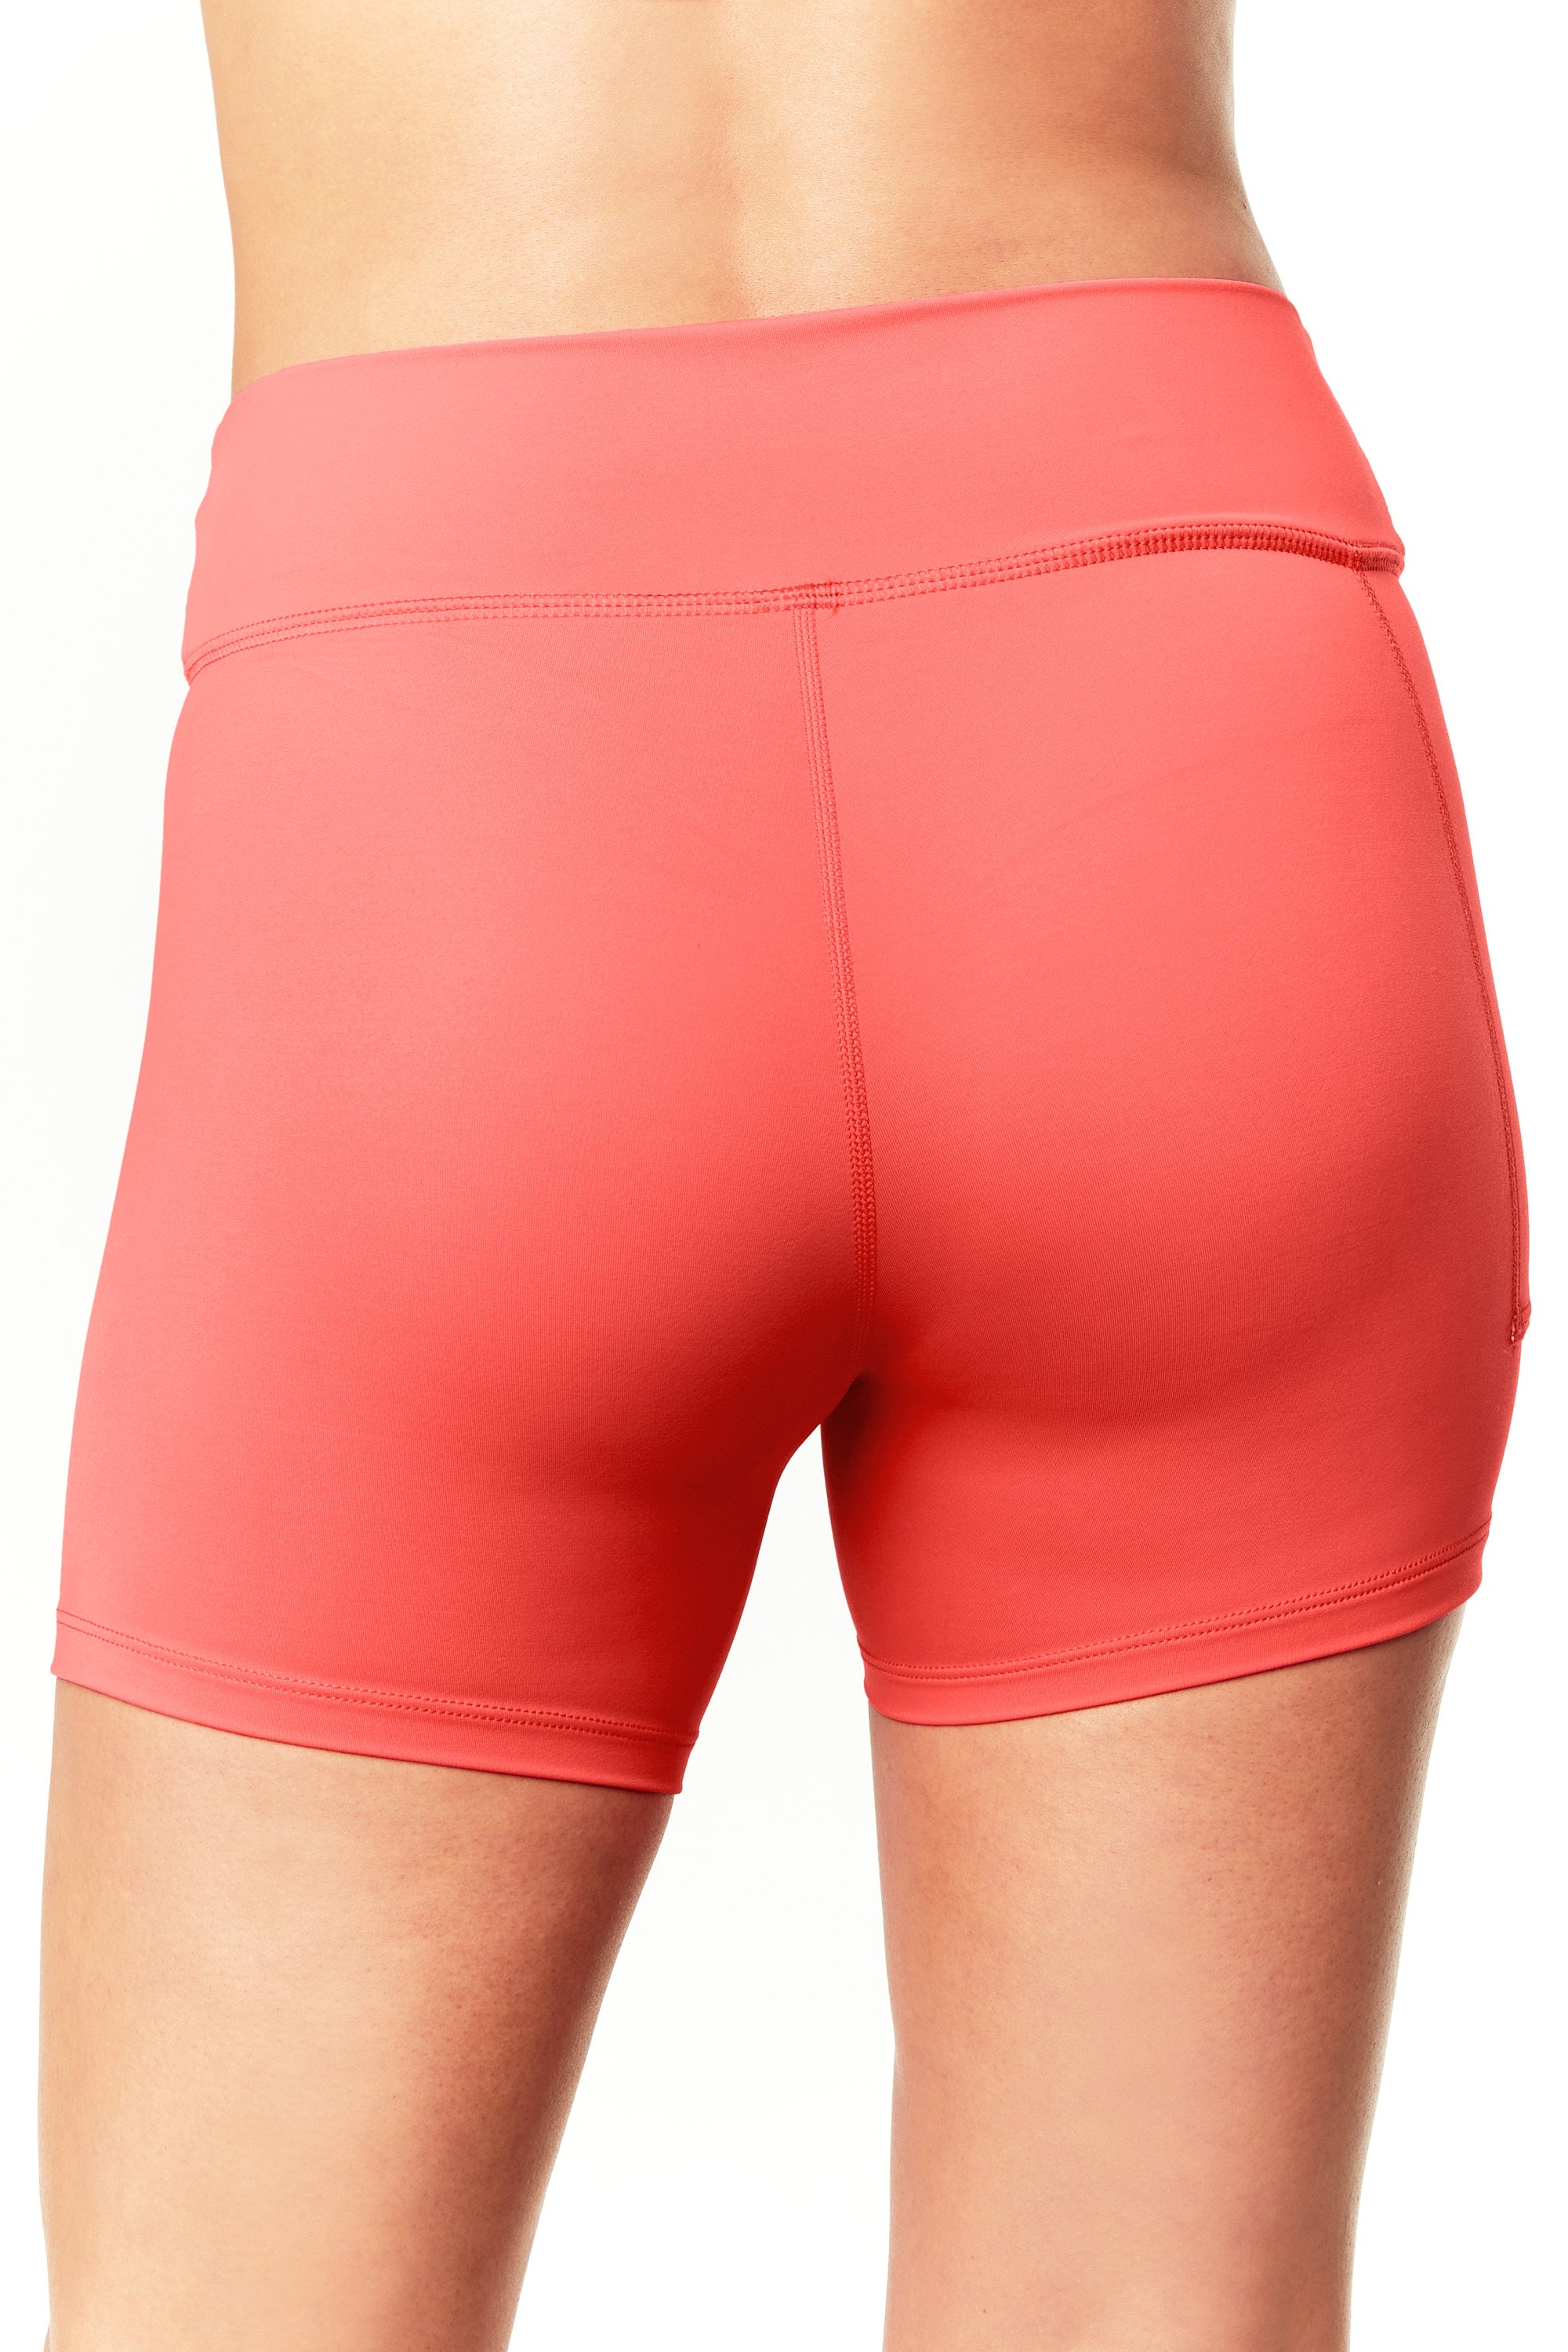 Bly Bloomer Shorts In Coral